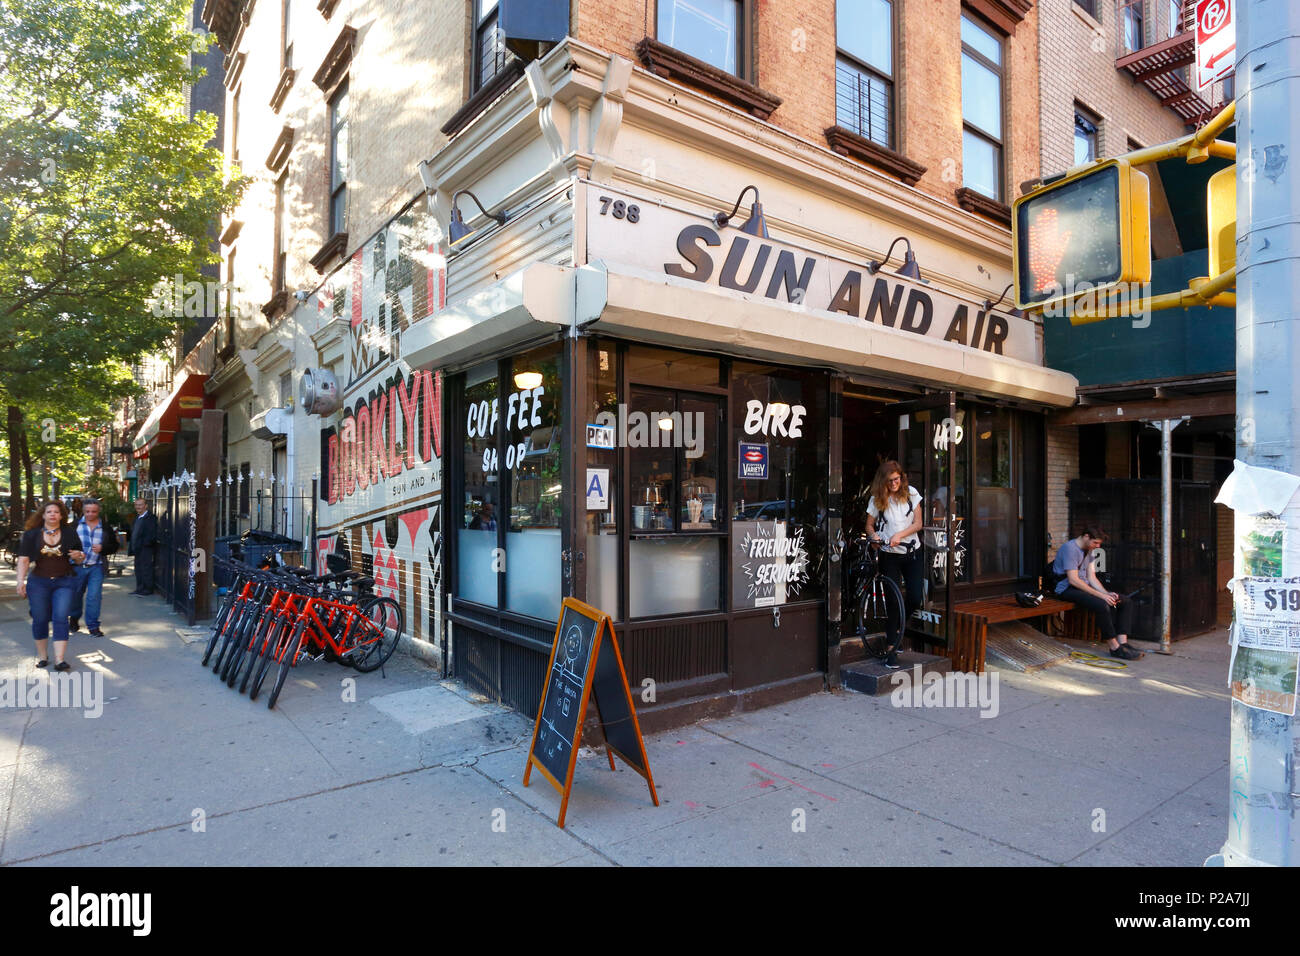 Sun and Air, 788 Driggs Ave, Brooklyn, NY. exterior storefront of a bicycle shop in the Williamsburg neighborhood. Stock Photo